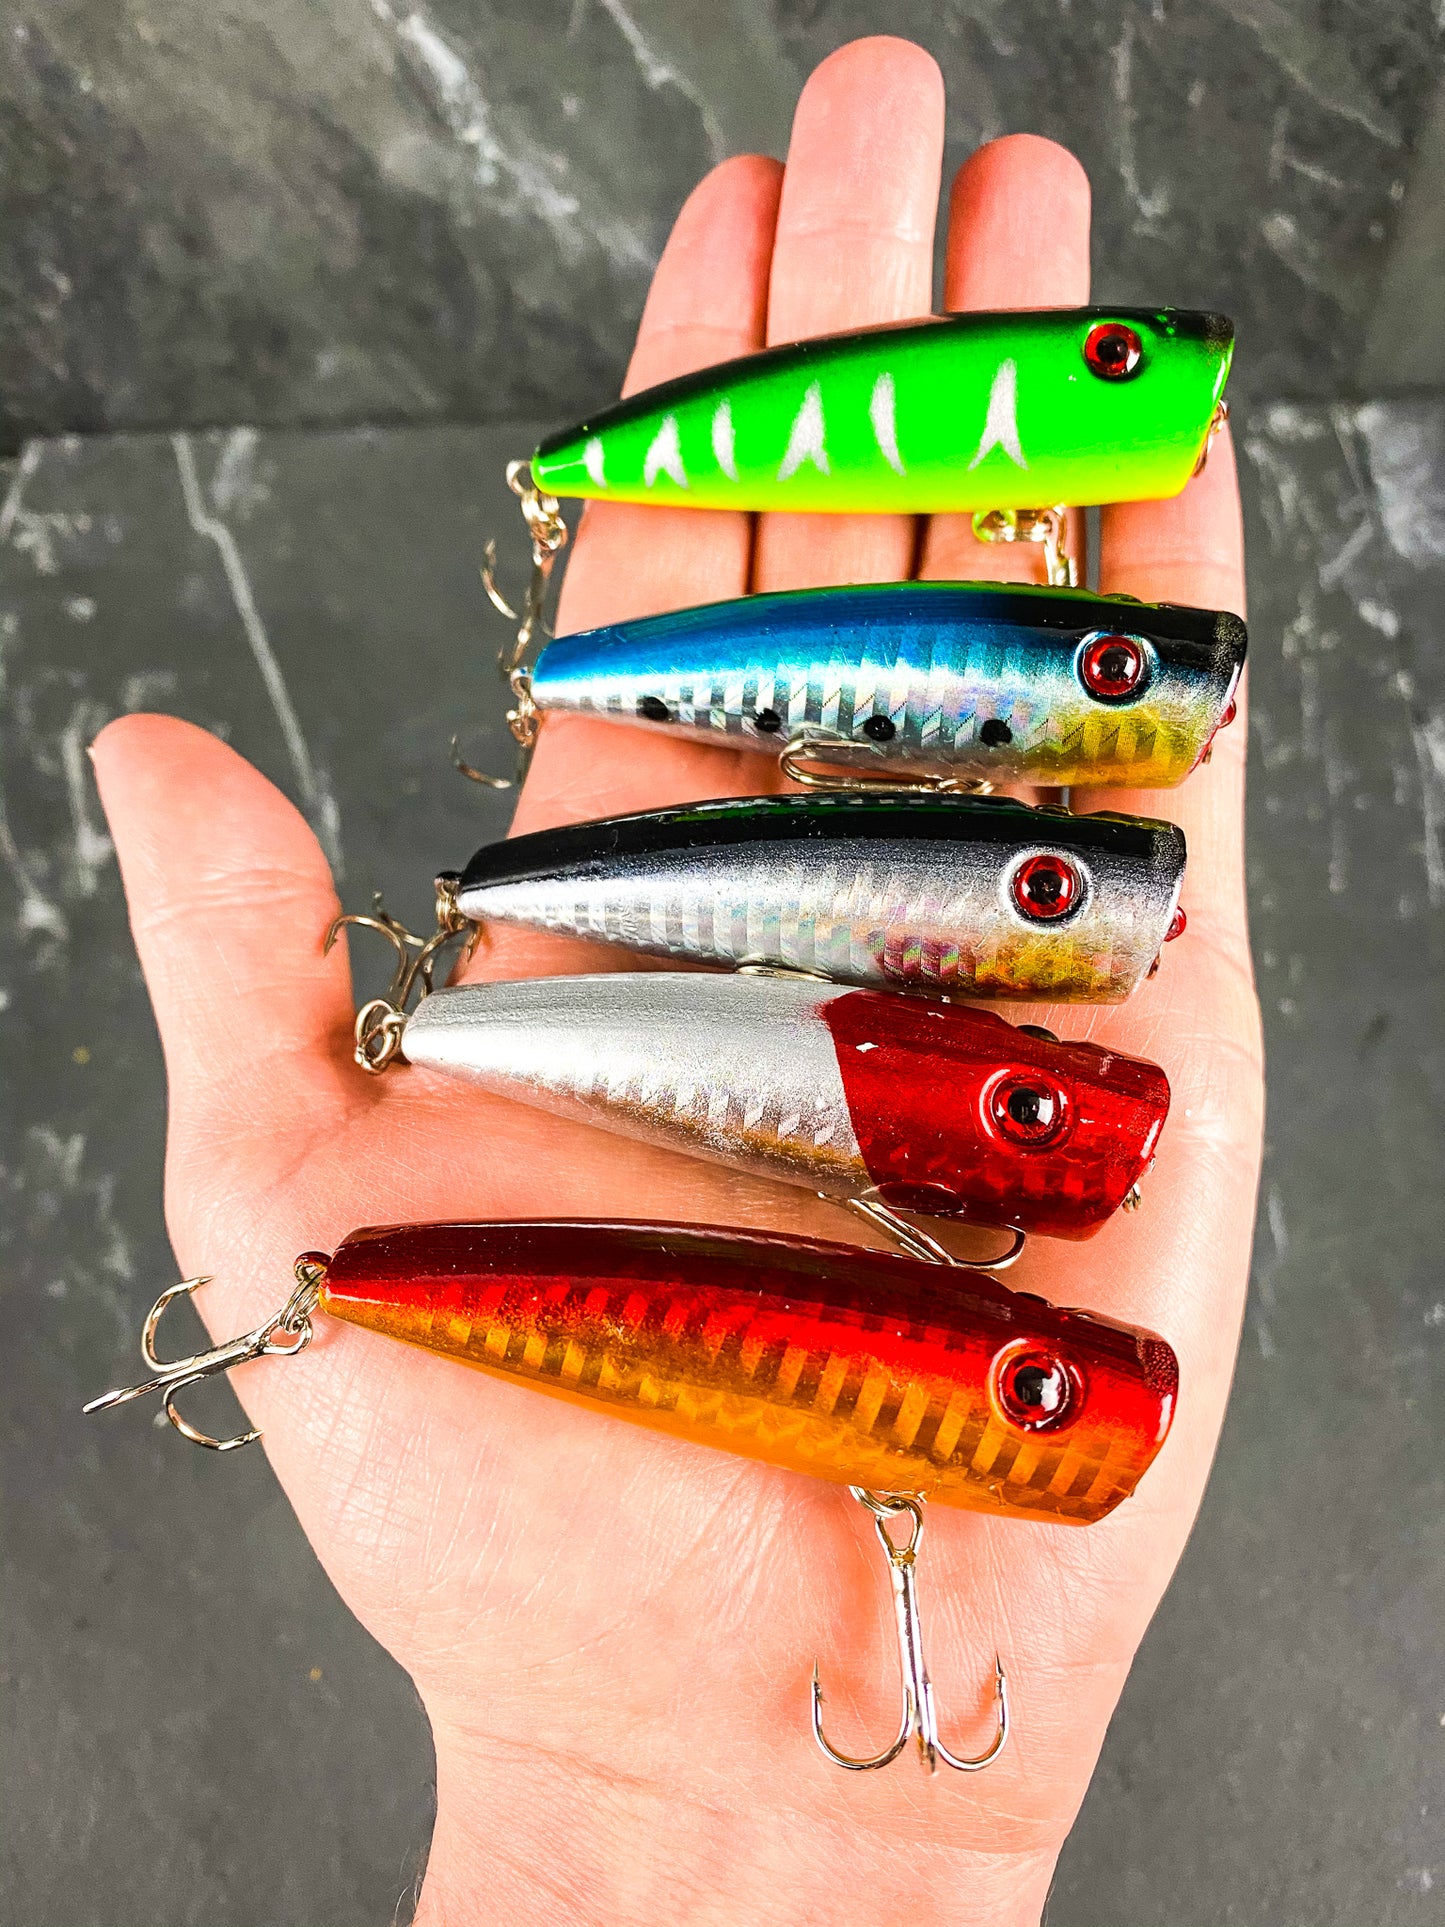 Top Water Fishing Lures Popper Lure Saltwater Minnow Swimming Crank Fishing  Lures Crankbait Baits 